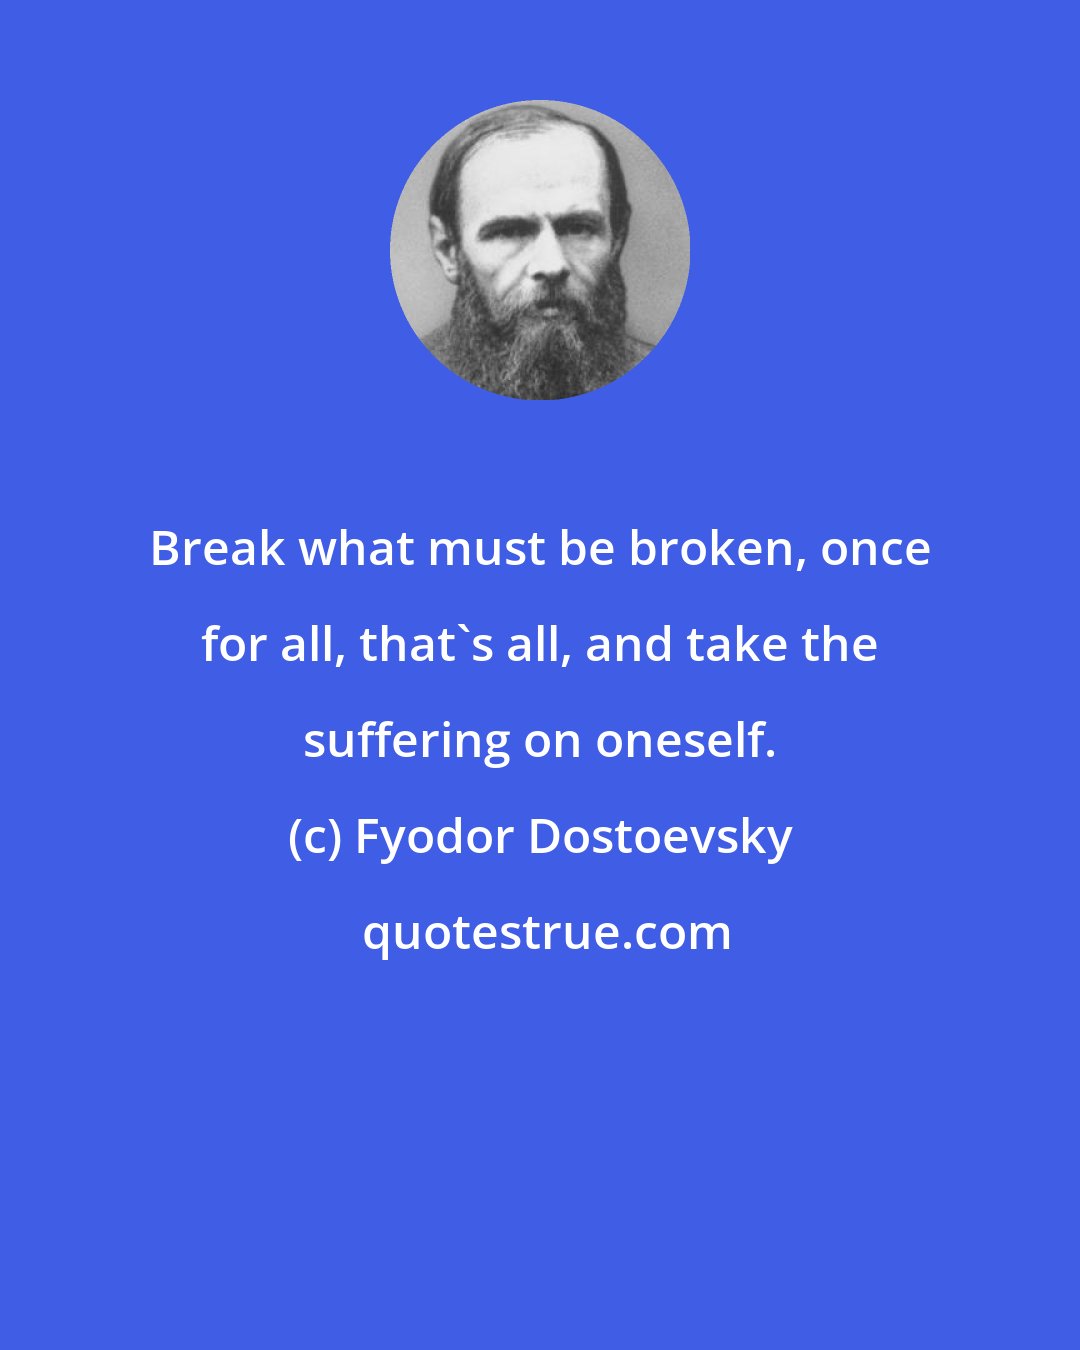 Fyodor Dostoevsky: Break what must be broken, once for all, that's all, and take the suffering on oneself.